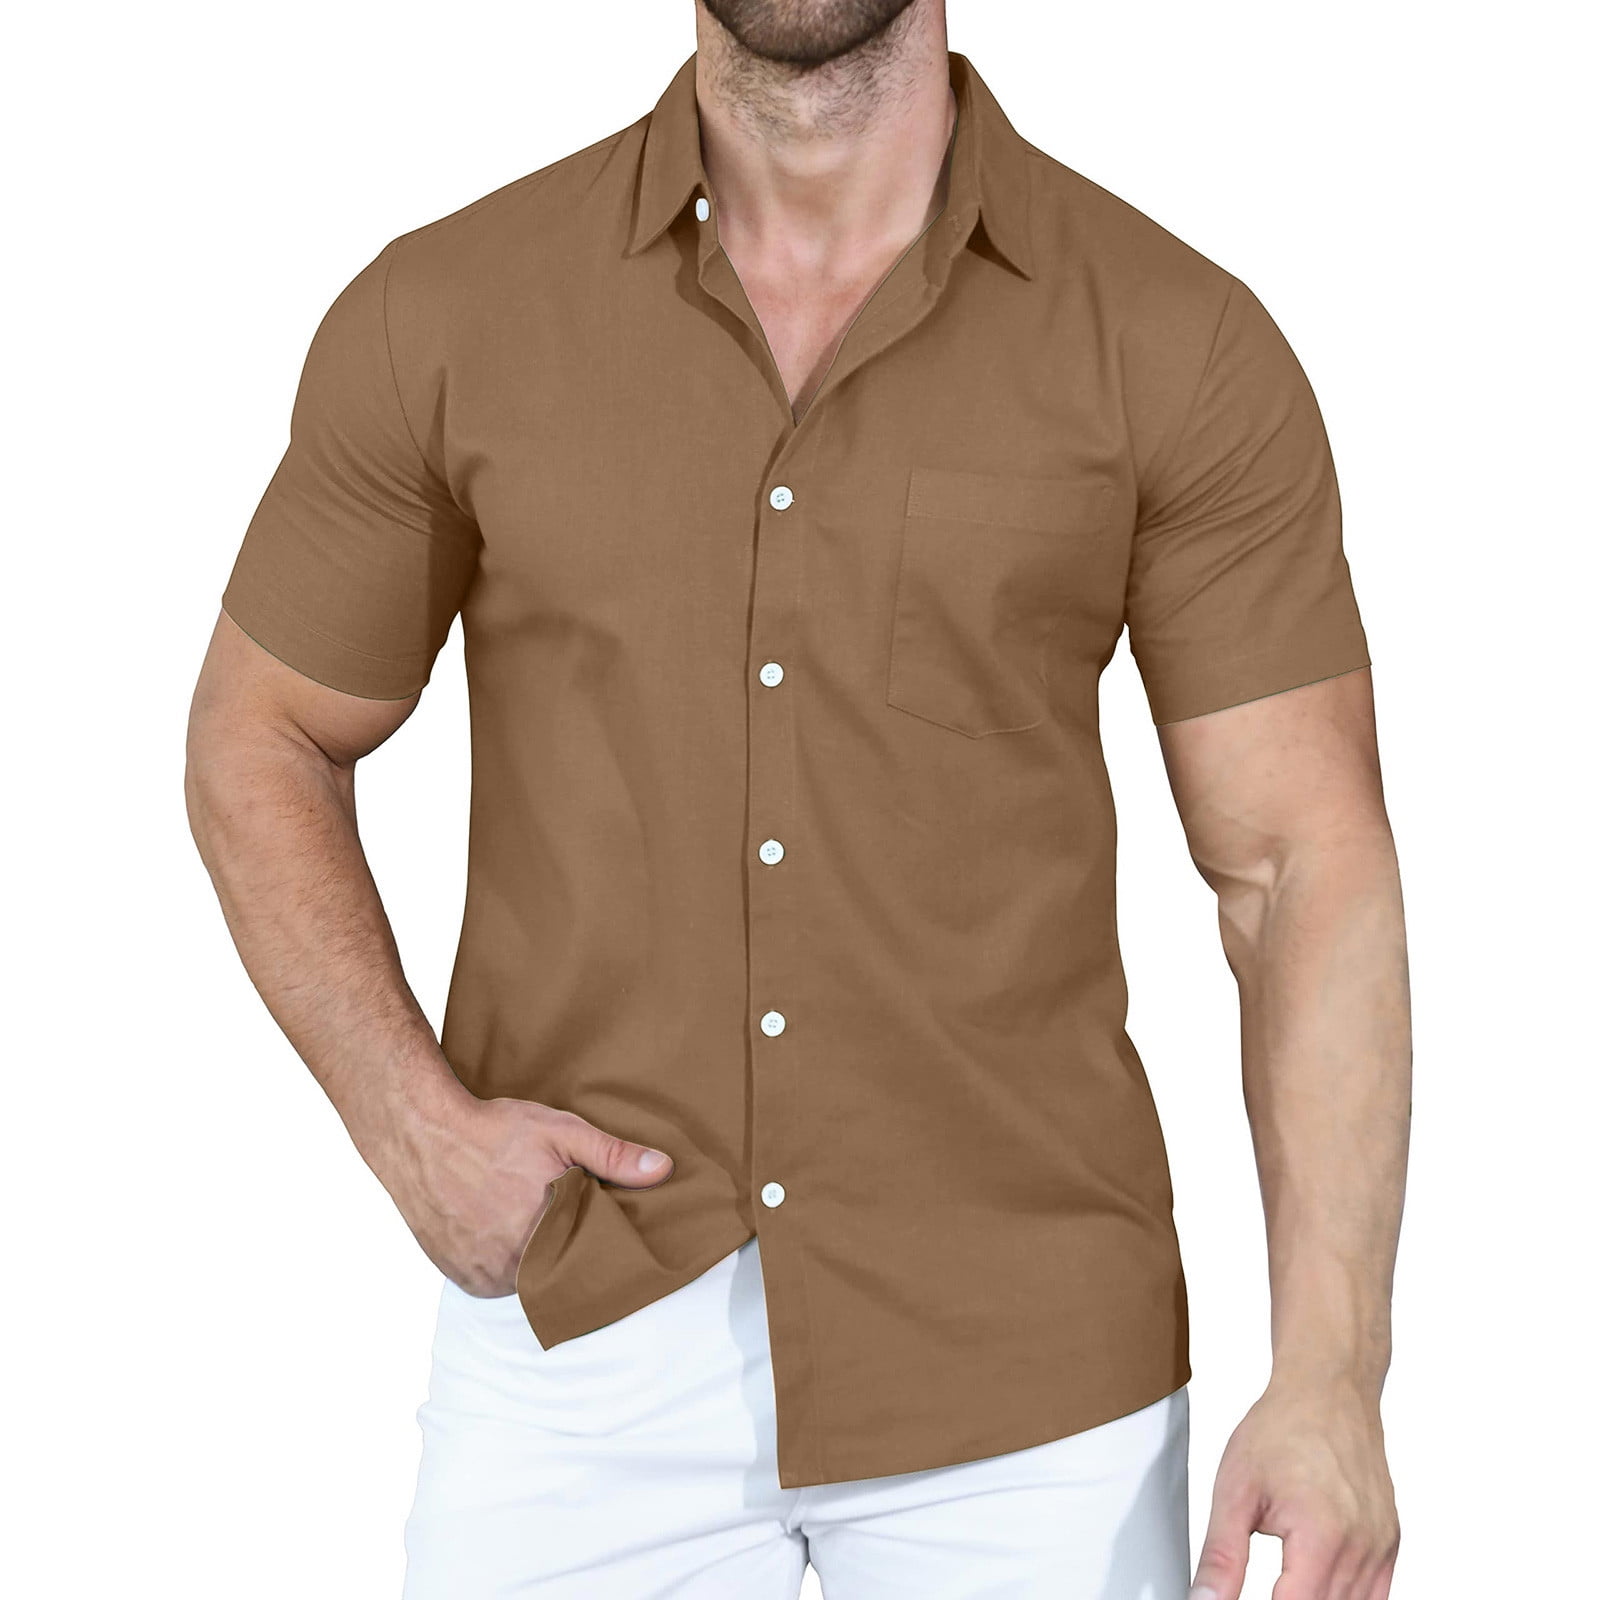 Men's Short Sleeve Wrinkle Free Shirt Button Down Casual Summer Dress  Shirts Fashion Business Shirts with pockets